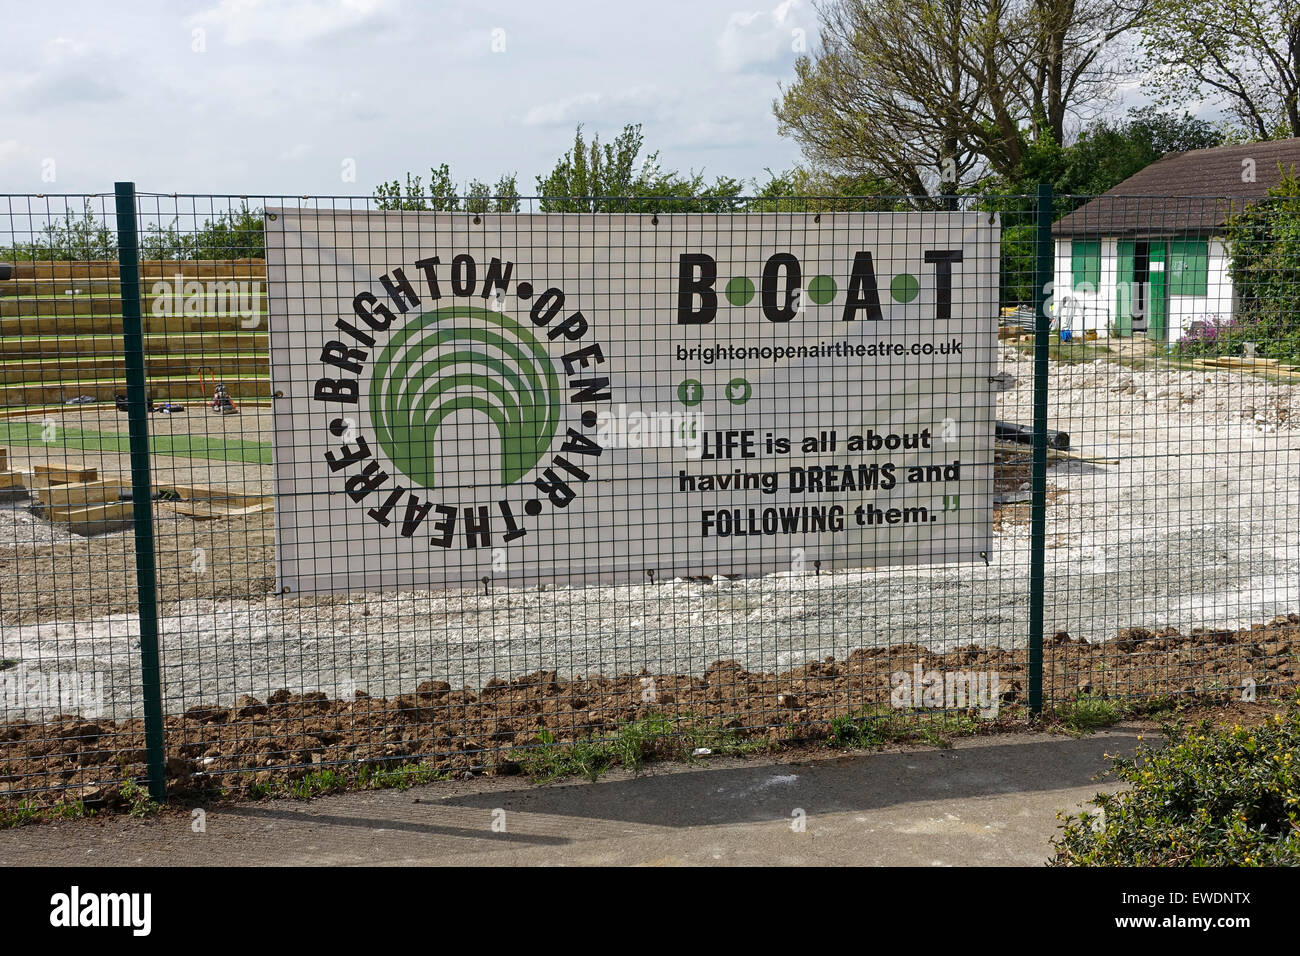 Construction work on the Brighton Open Air Theatre, (BOAT or B.O.A.T), Dyke Road Park, Brighton, England, 2015 Stock Photo